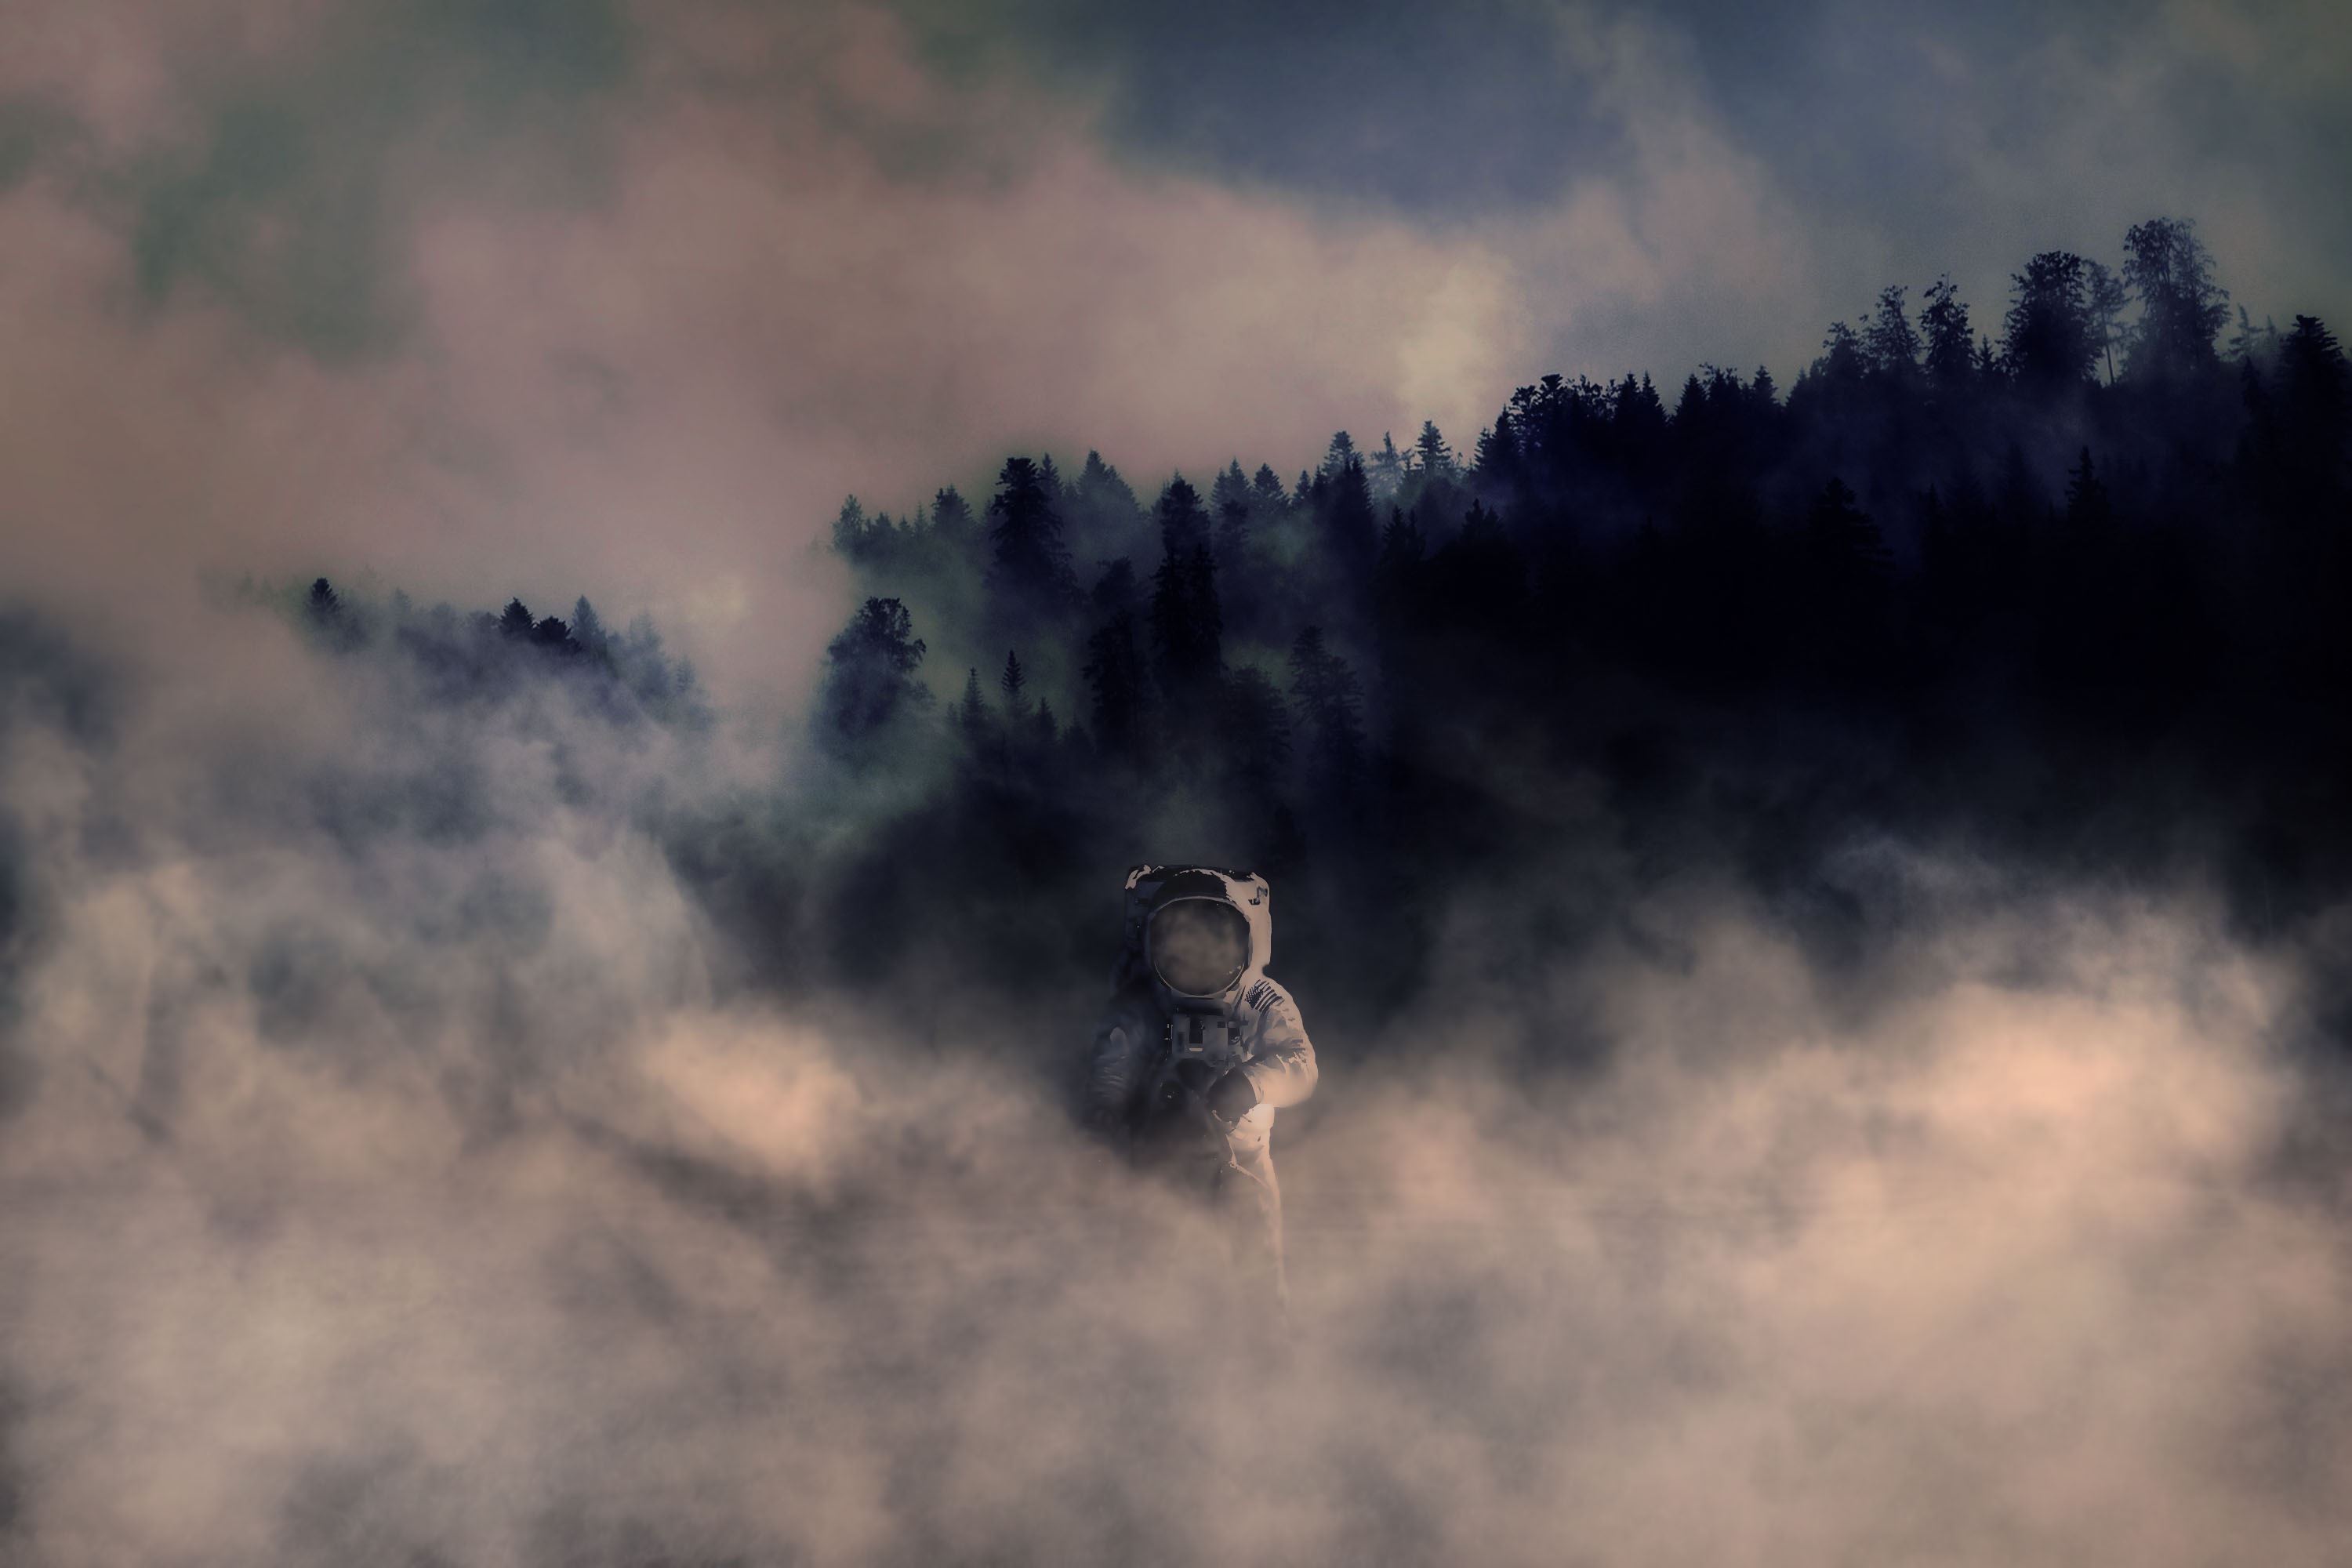 universe, photoshop, cosmonaut, spacesuit, space suit, smoke, forest wallpaper for mobile